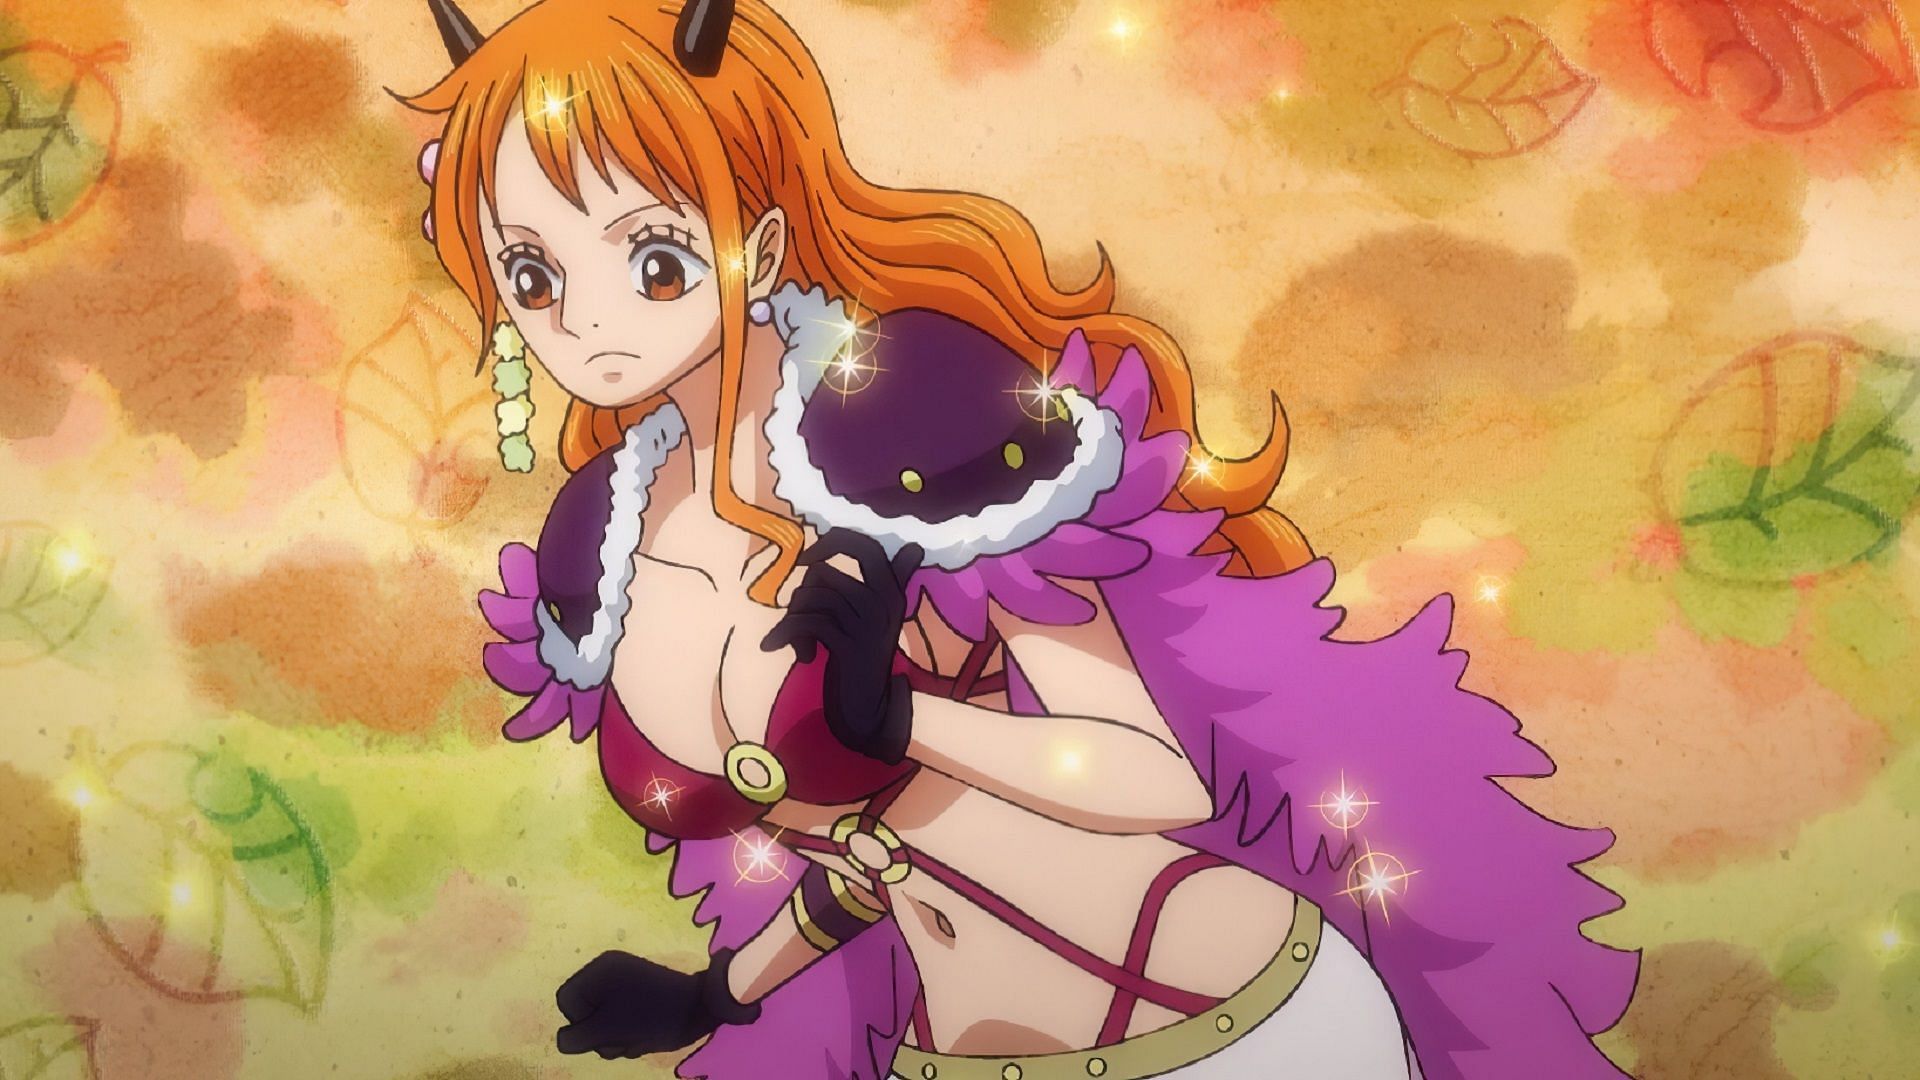 Nami in her initial Onigashima outfit (Image via Toei Animation, One Piece)